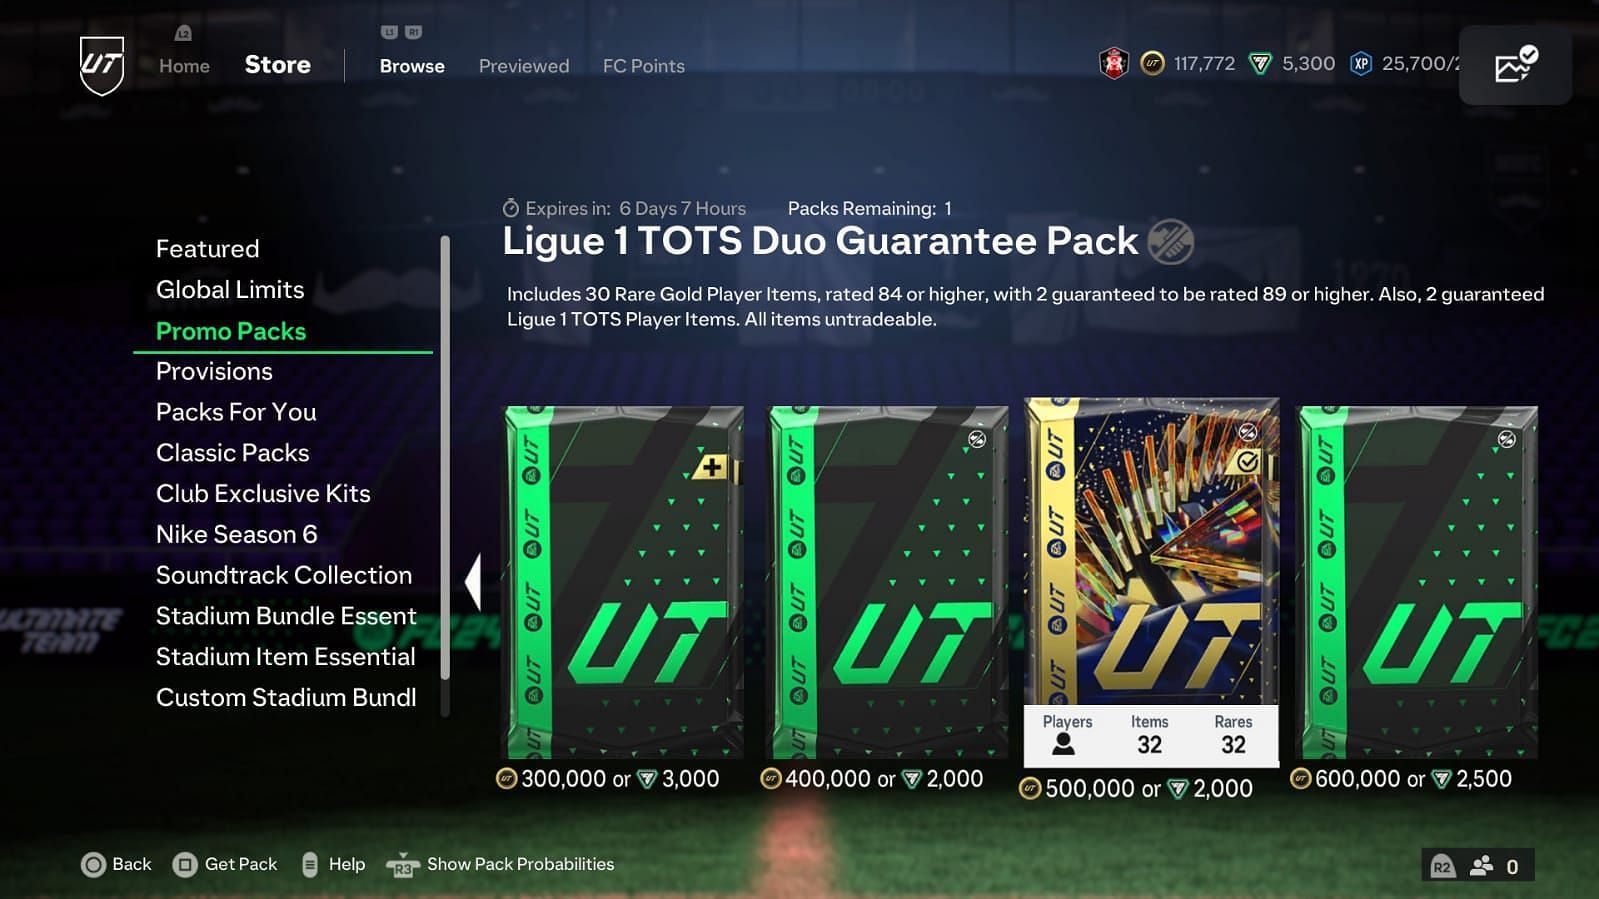 The pack has some amazing contents (Image via EA Sports)